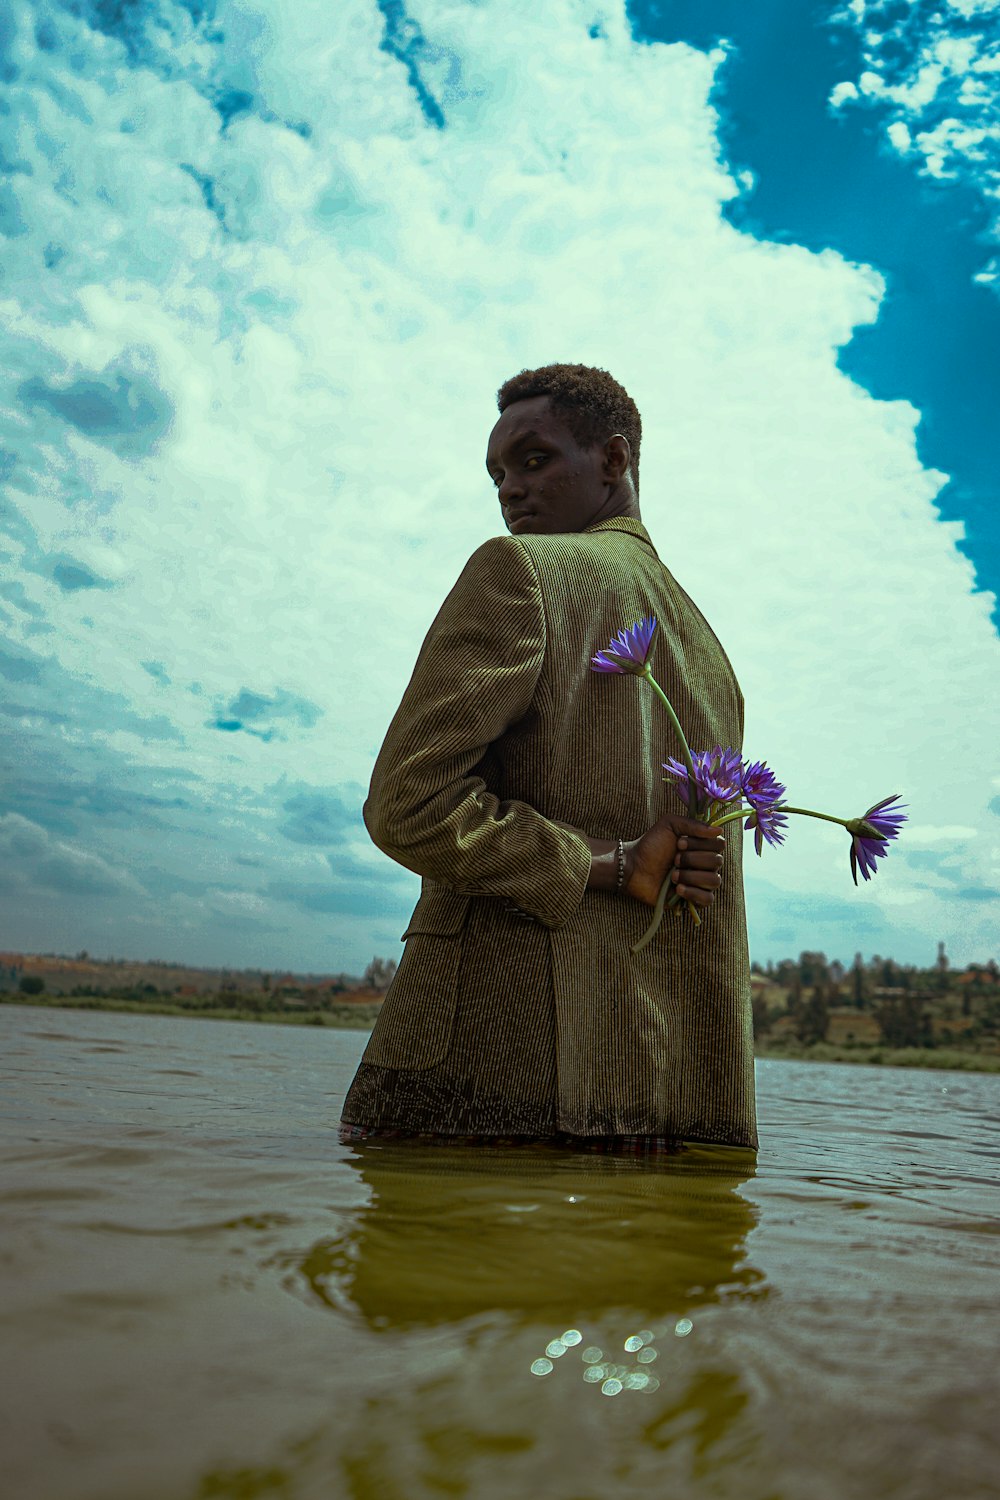 a person holding flowers in a body of water